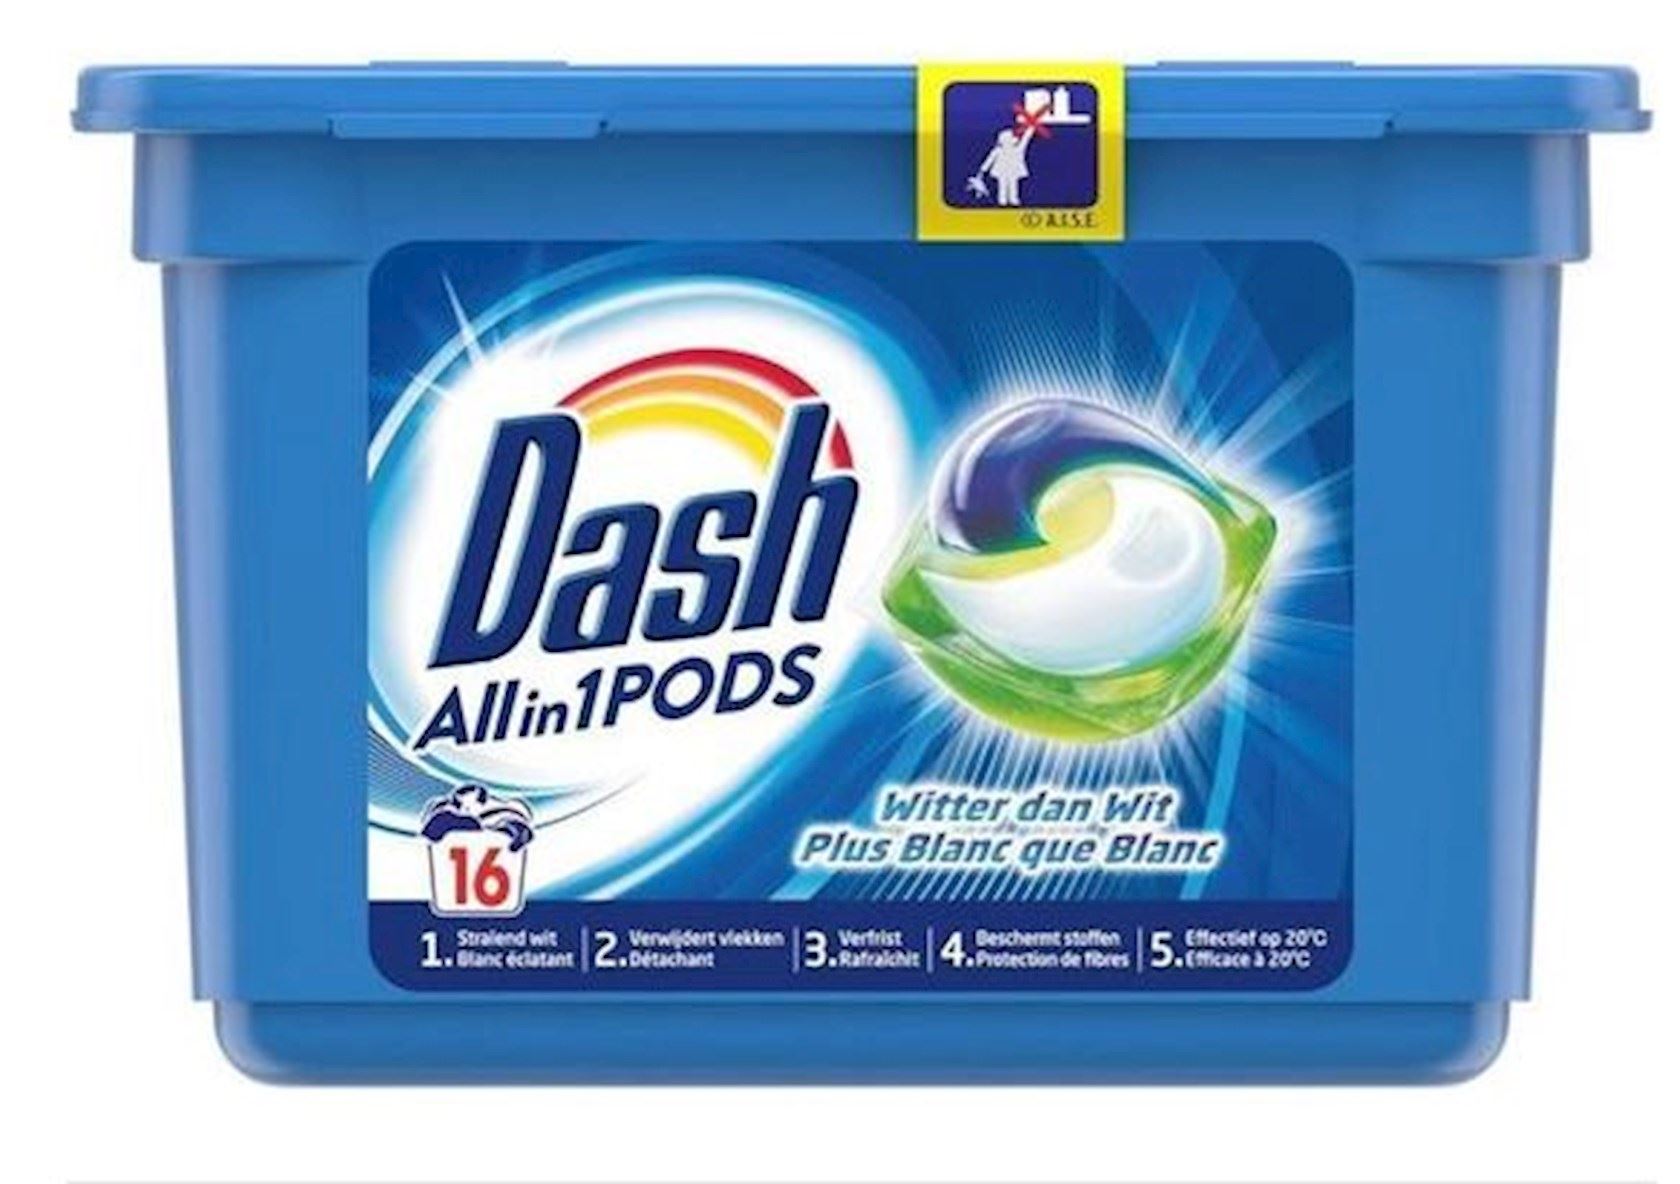 Dash-Pods-16D-All-in-1-Witter-dan-wit